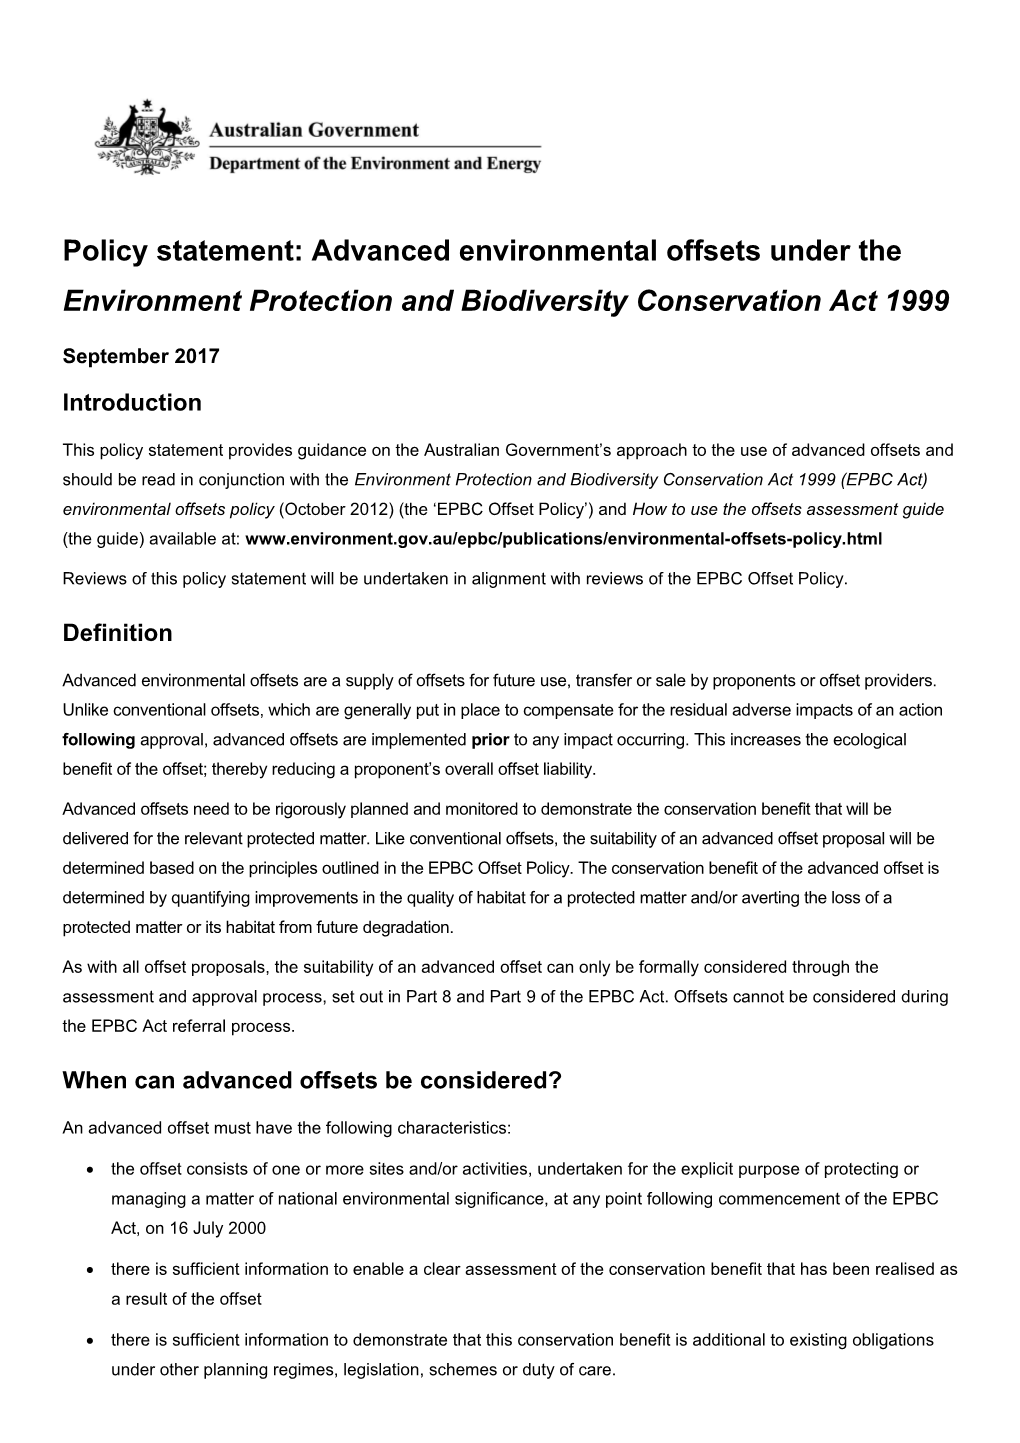 Policy Statement: Advanced Environmental Offsets Under the Environment Protection And